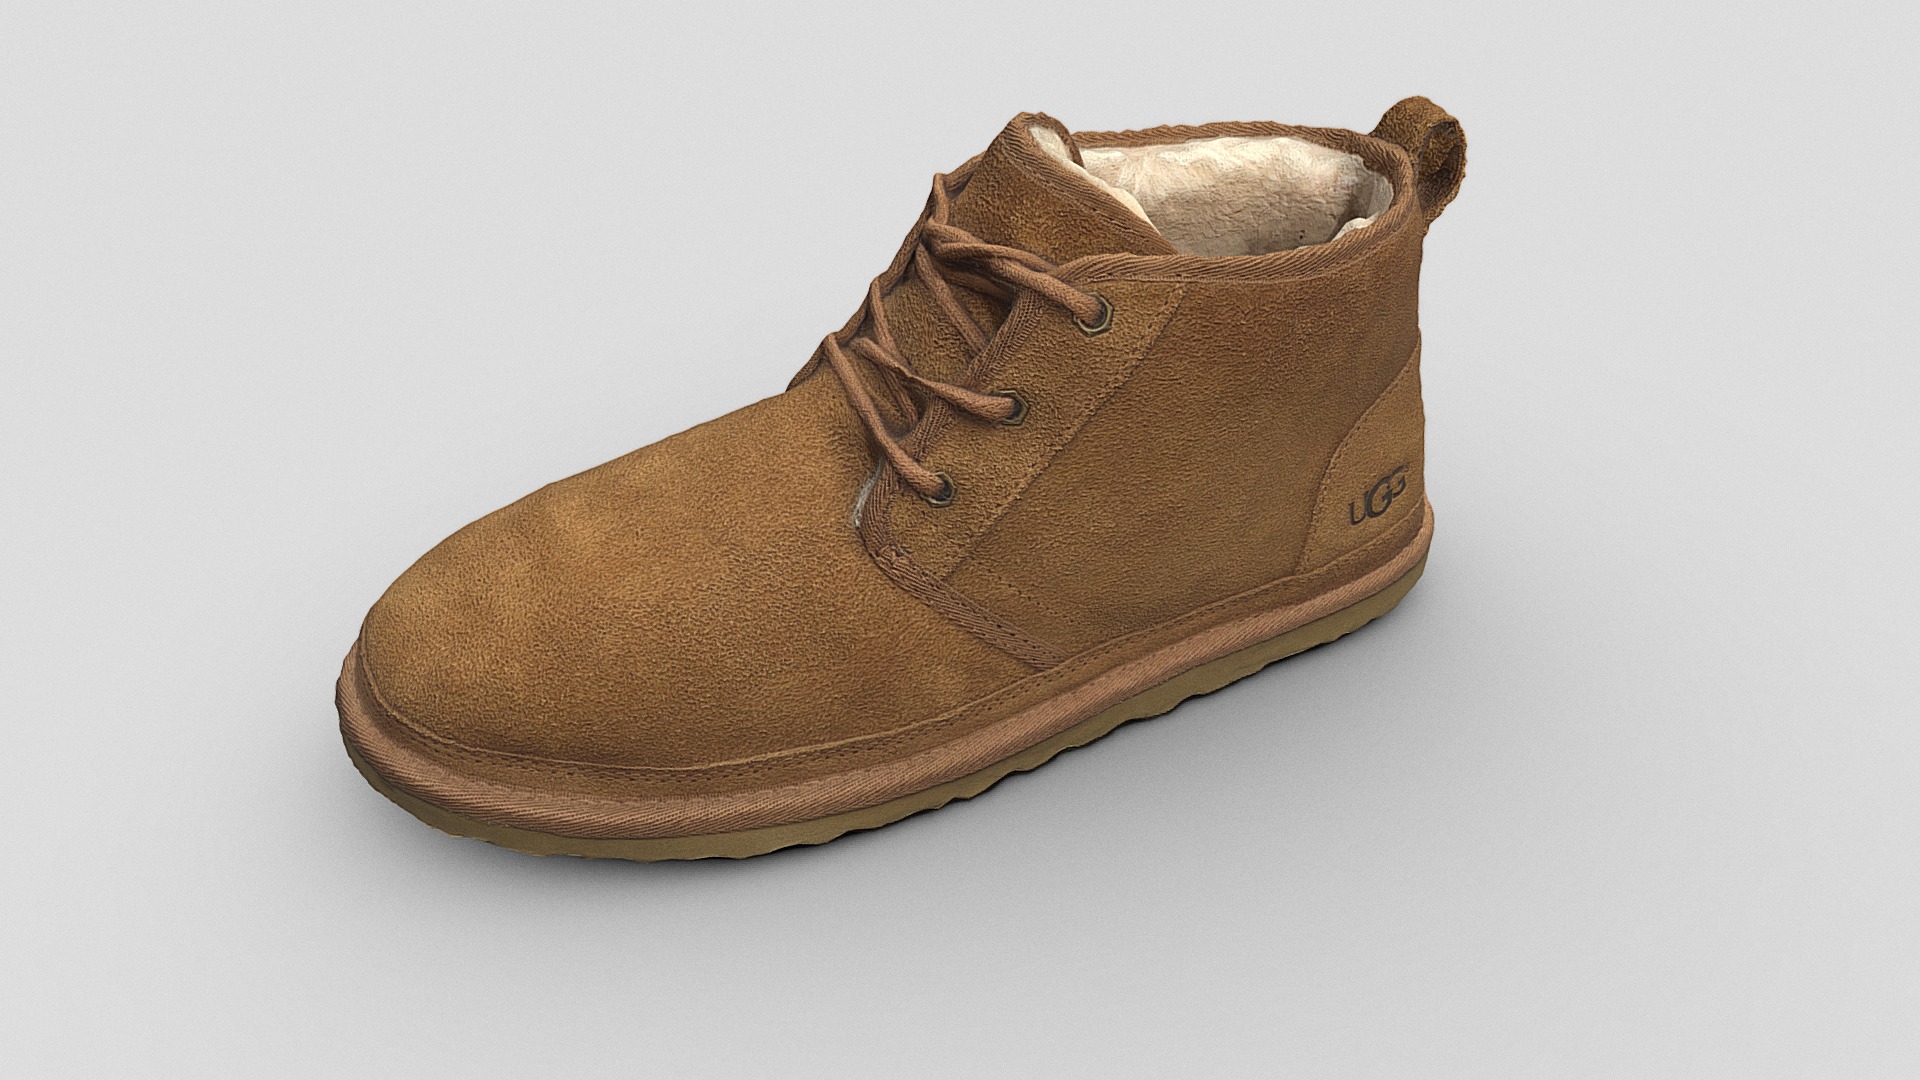 3D model UGG Neumel boot chestnut - This is a 3D model of the UGG Neumel boot chestnut. The 3D model is about a brown leather boot.